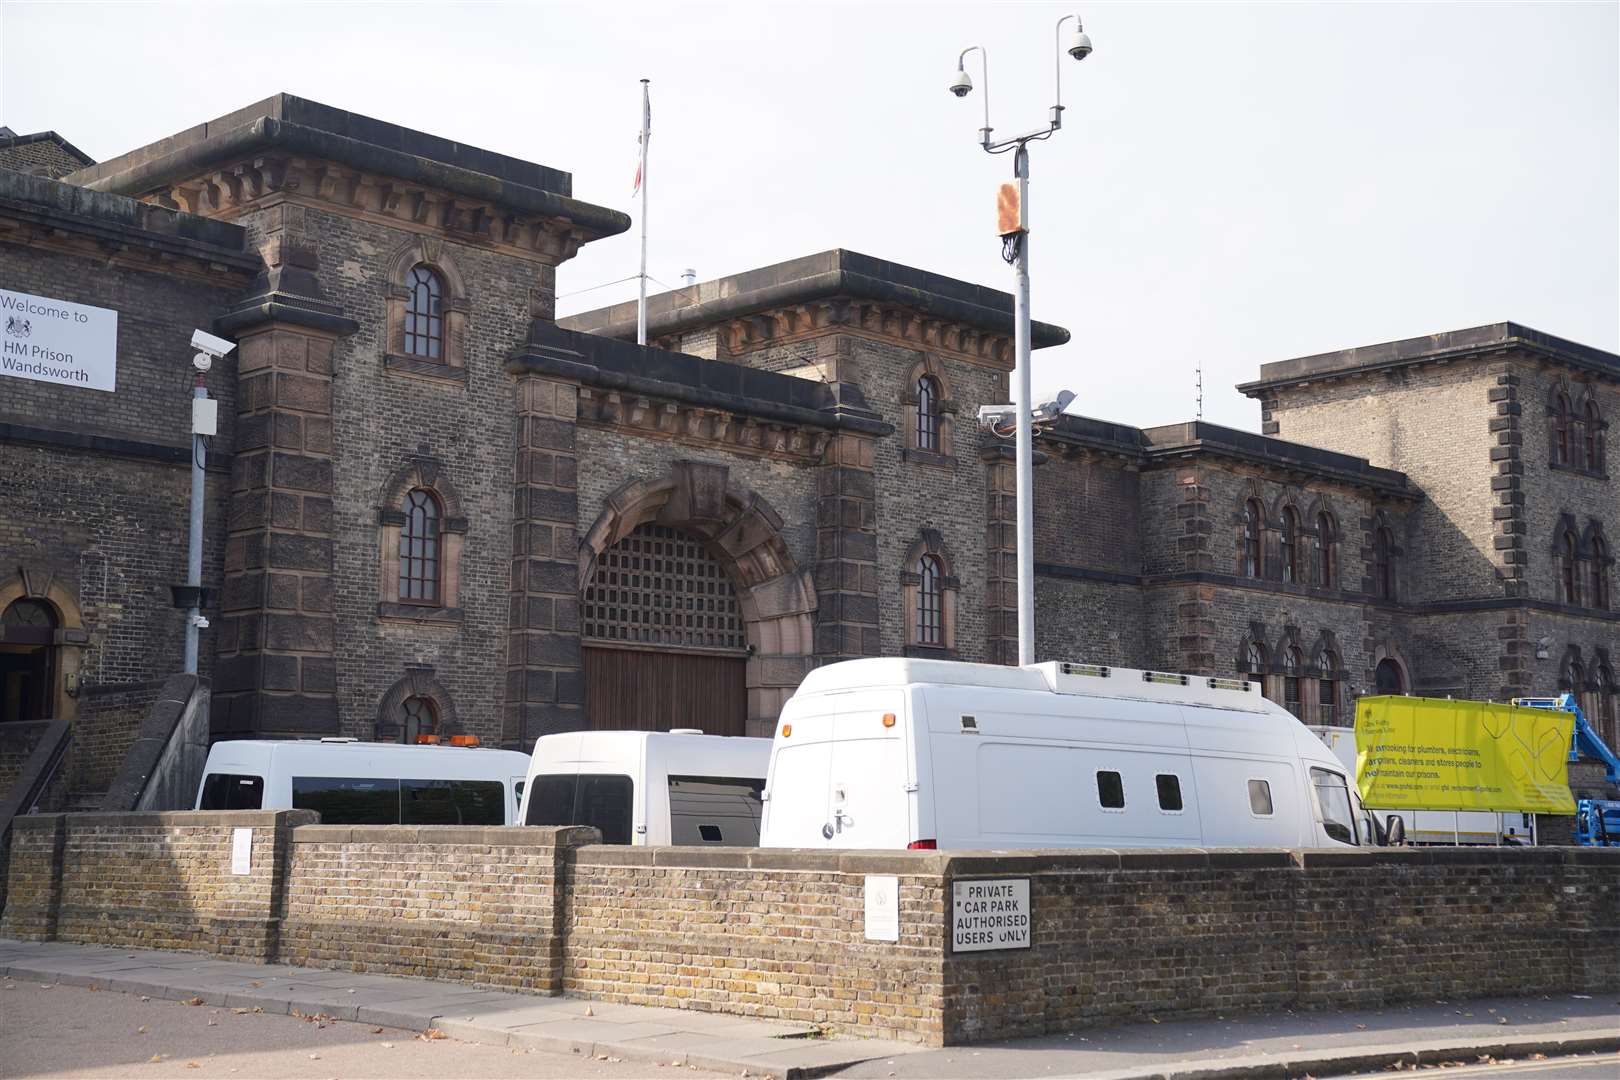 Prior to his alleged escape, Daniel Khalife had been on remand at Wandsworth Prison after being charged with terror offences in January (Lucy North/PA)